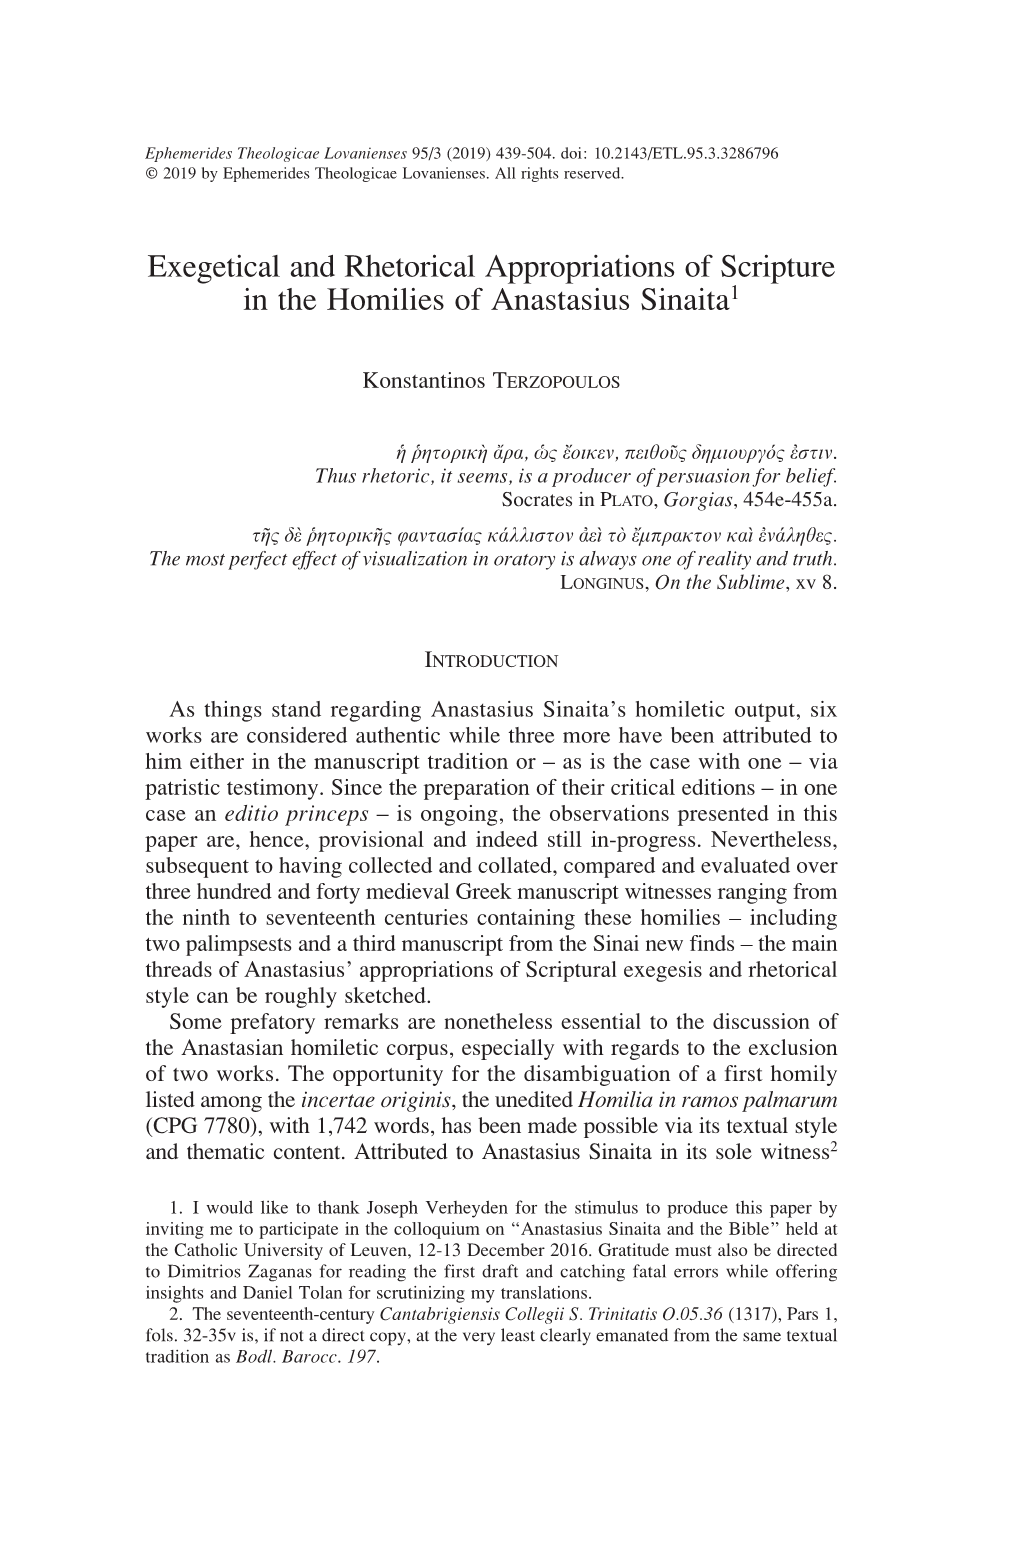 Exegetical and Rhetorical Appropriations of Scripture in the Homilies of Anastasius Sinaita1